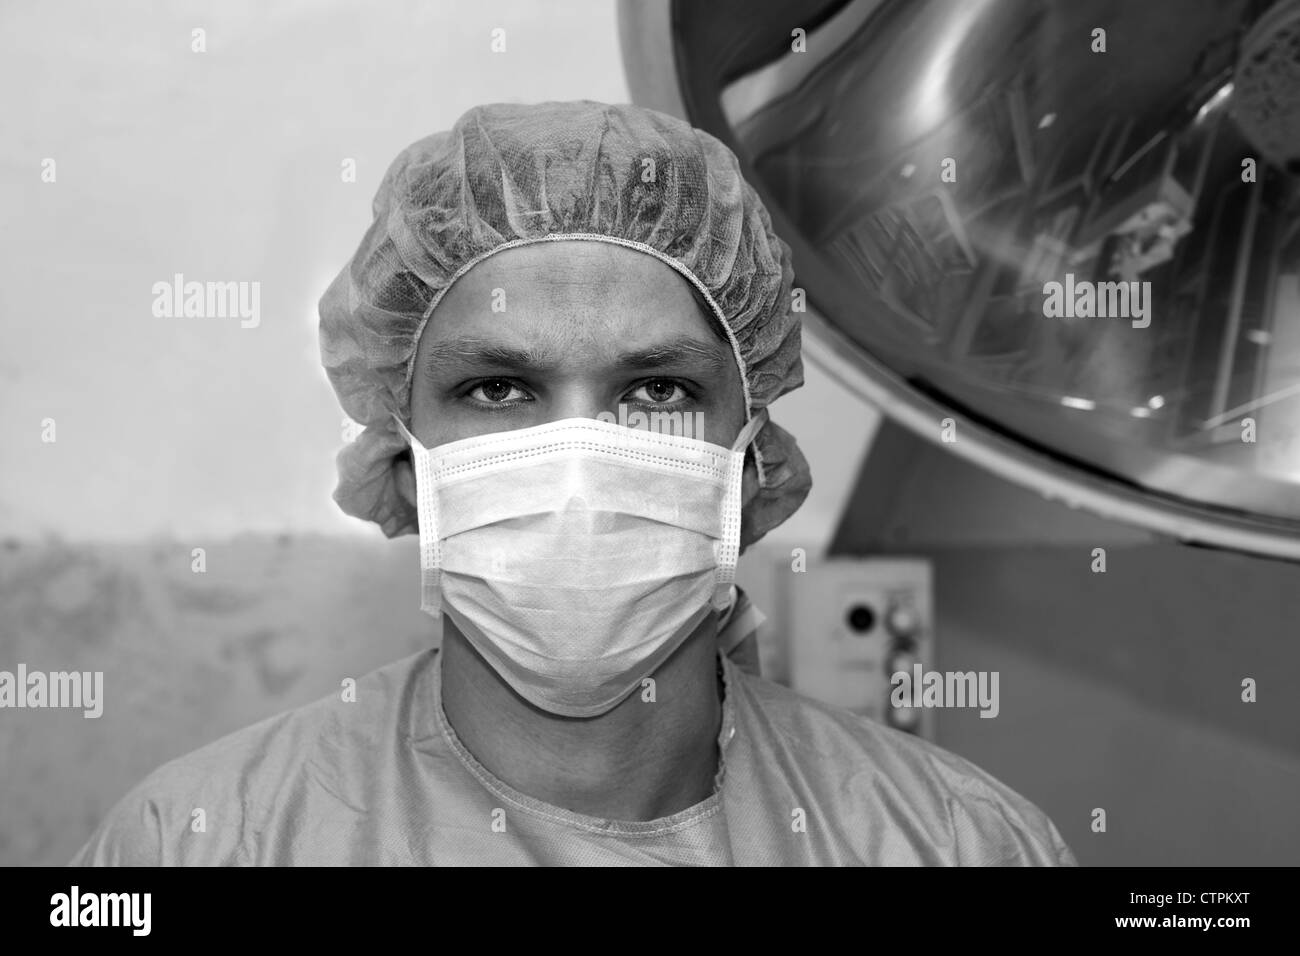 Shaded surgeon seems serious about coming difficult surgery Stock Photo